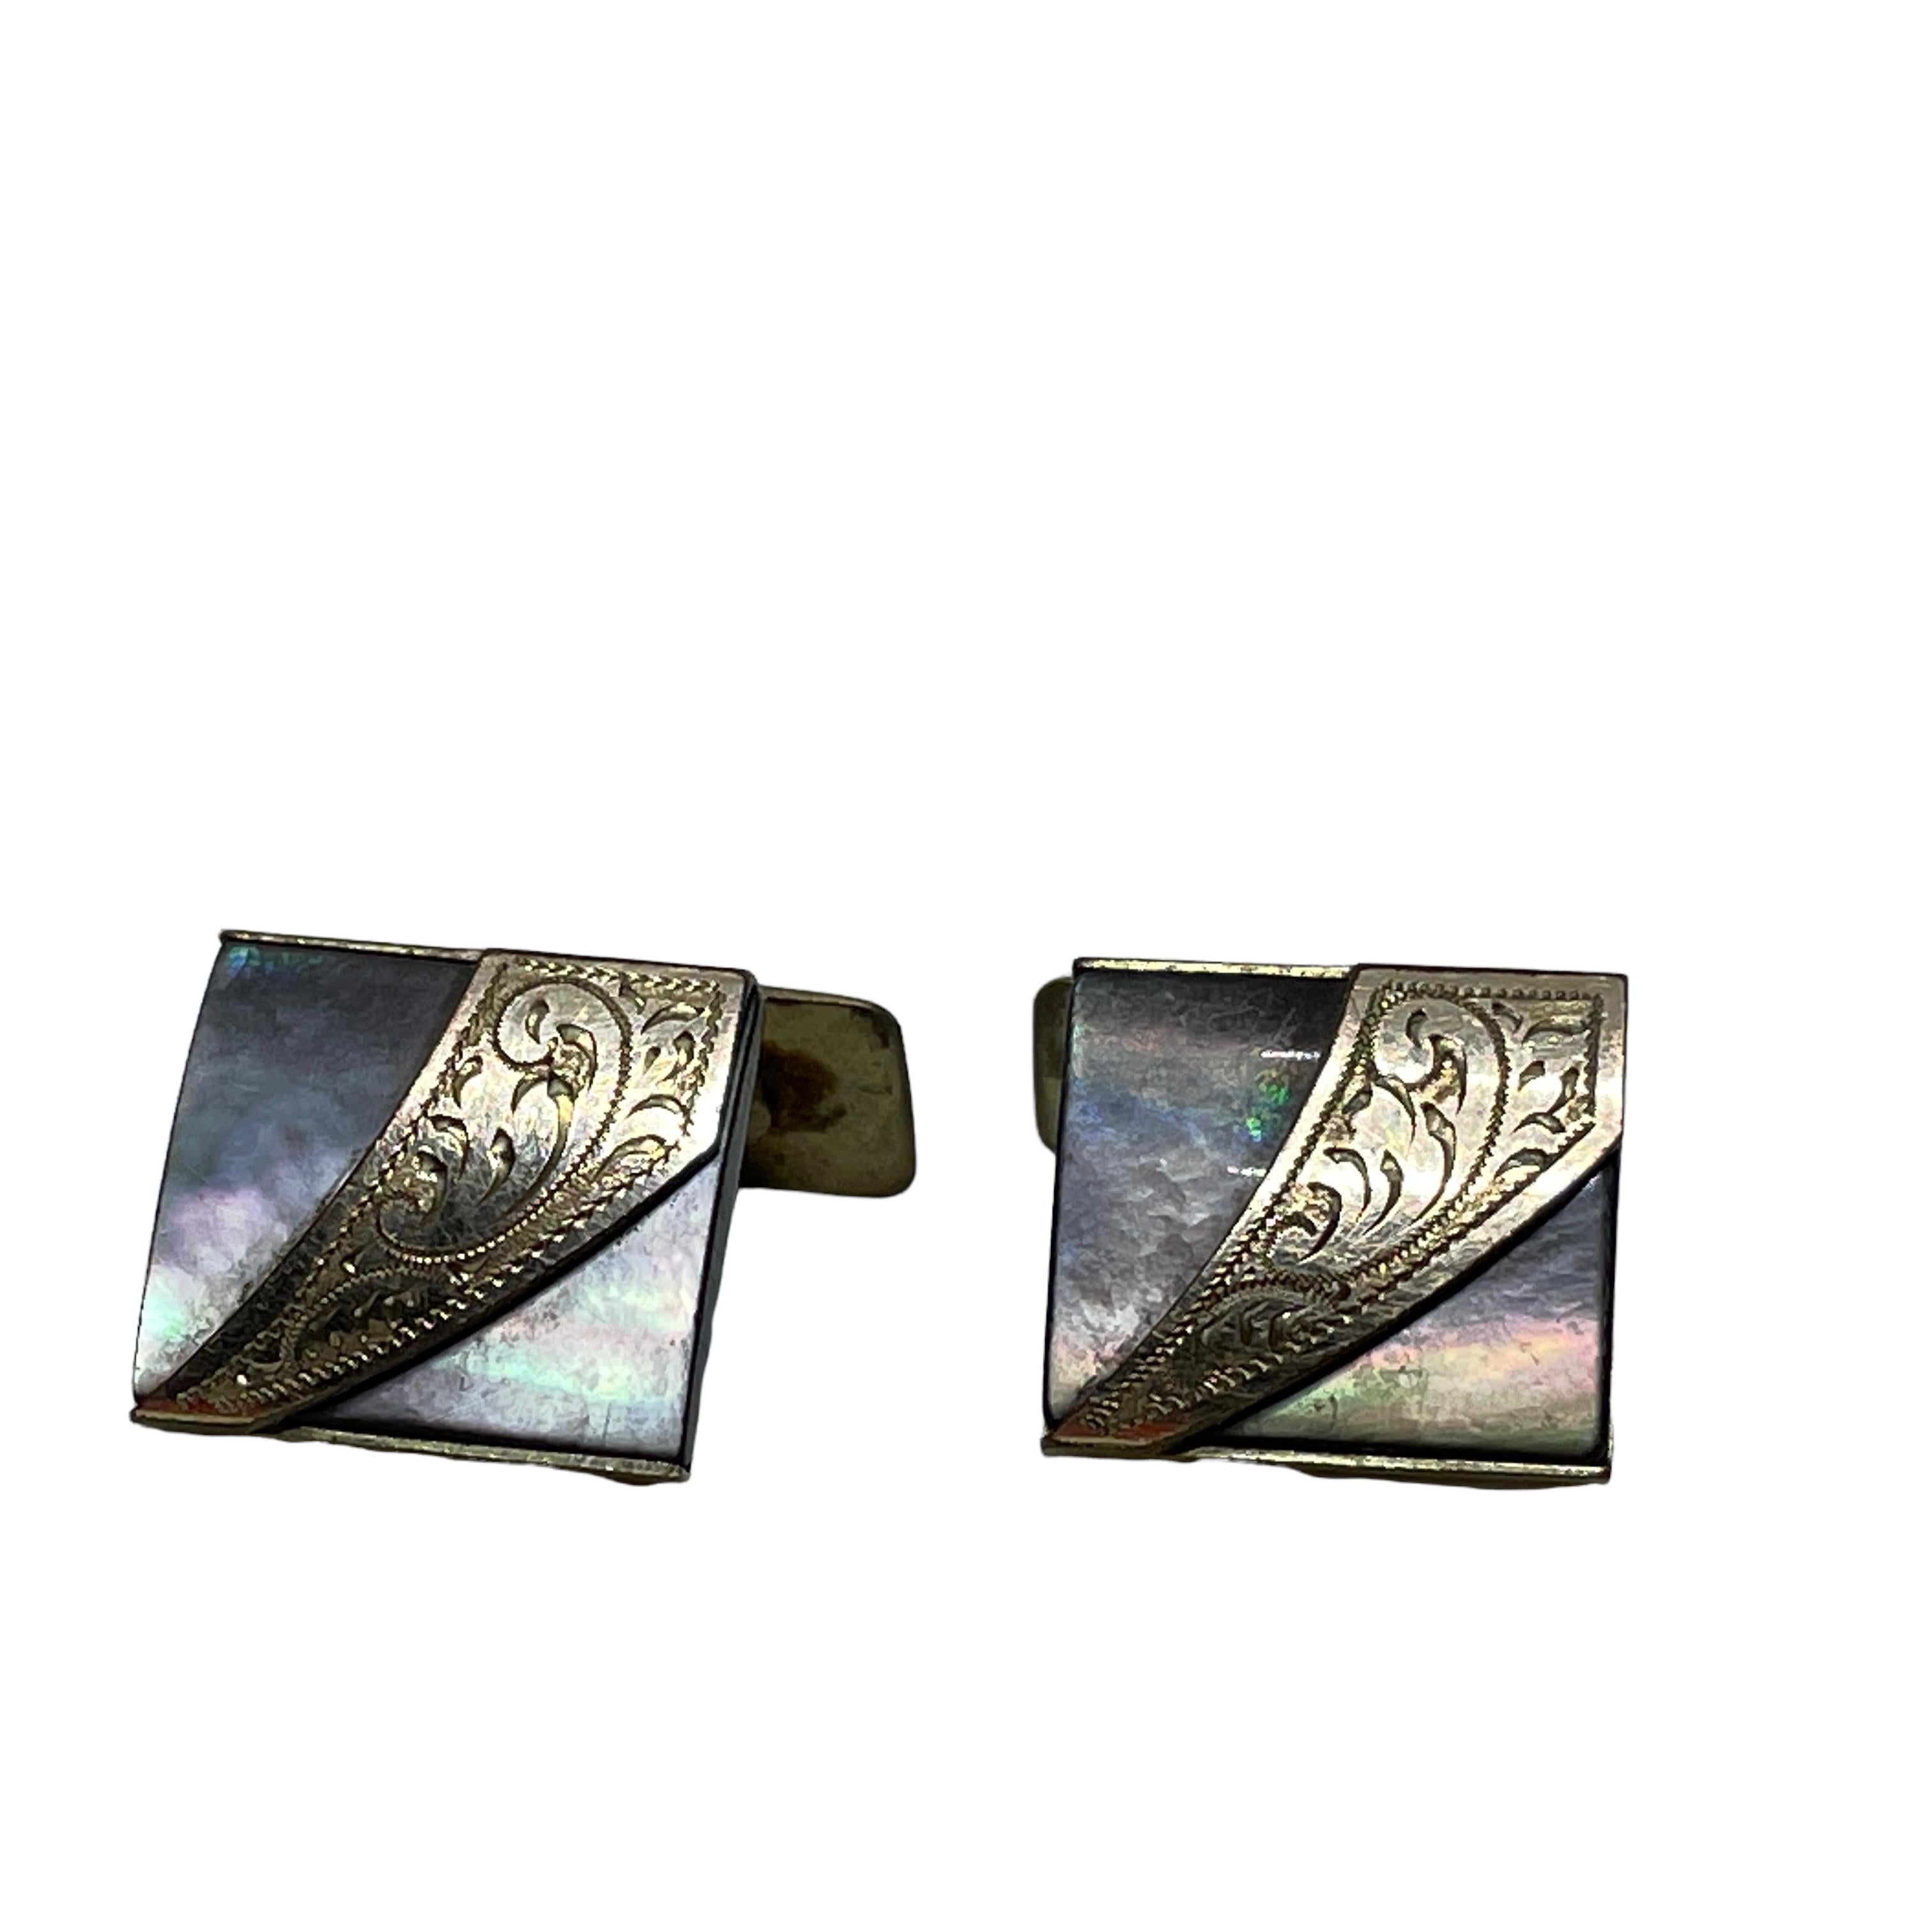 Two lovely stylish cufflinks in original old box. Made in Germany, circa 1900. Each is marked with a manufactory mark and 